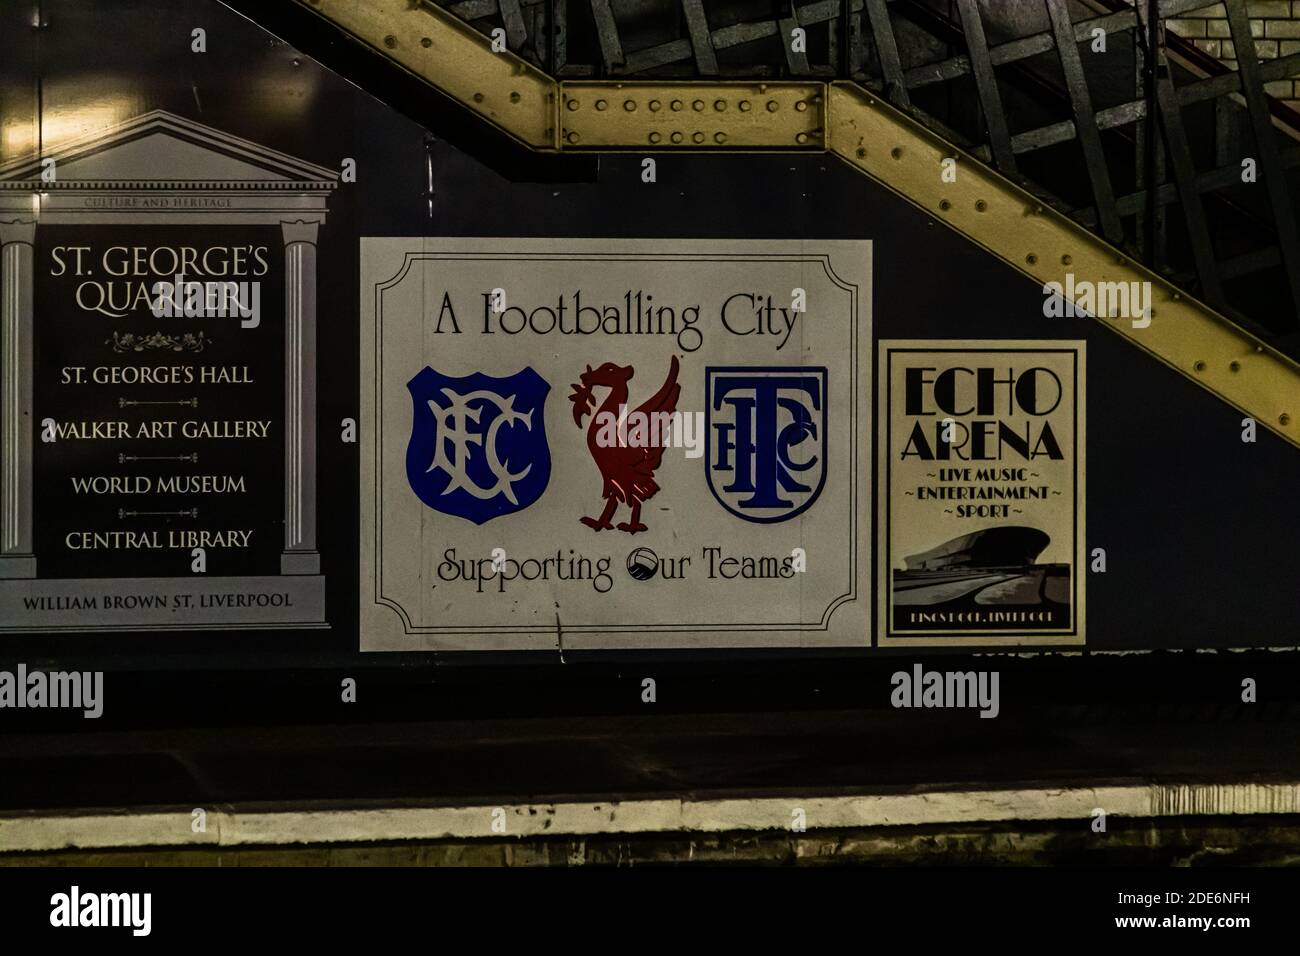 Advertisement for three Liverpool football clubs on the underground of Liverpool, England Stock Photo